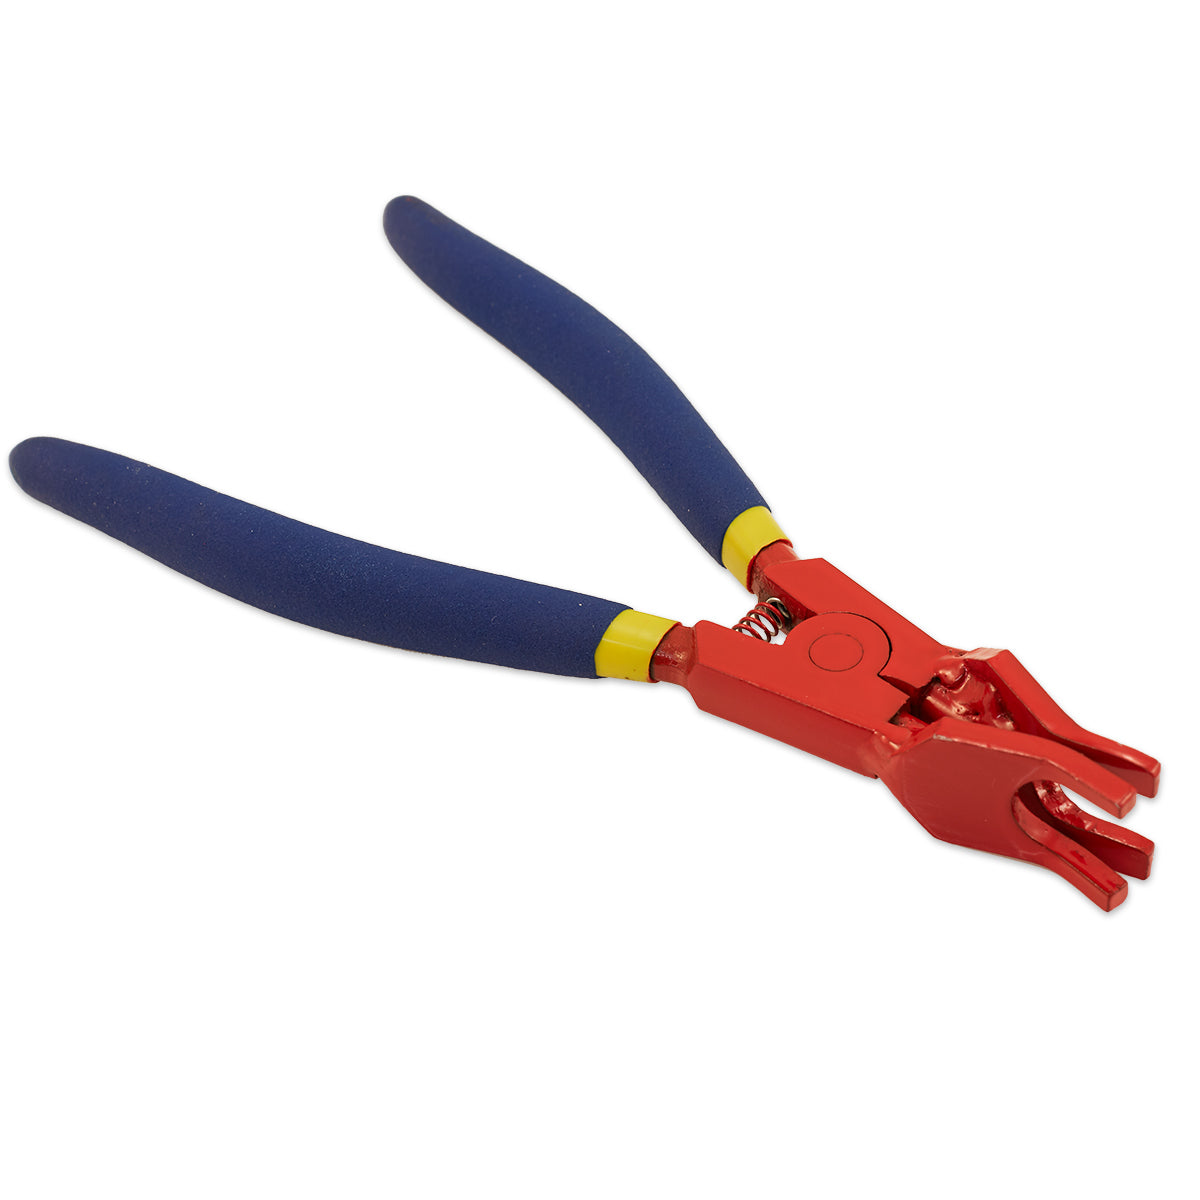 Tubing Adapter Pliers